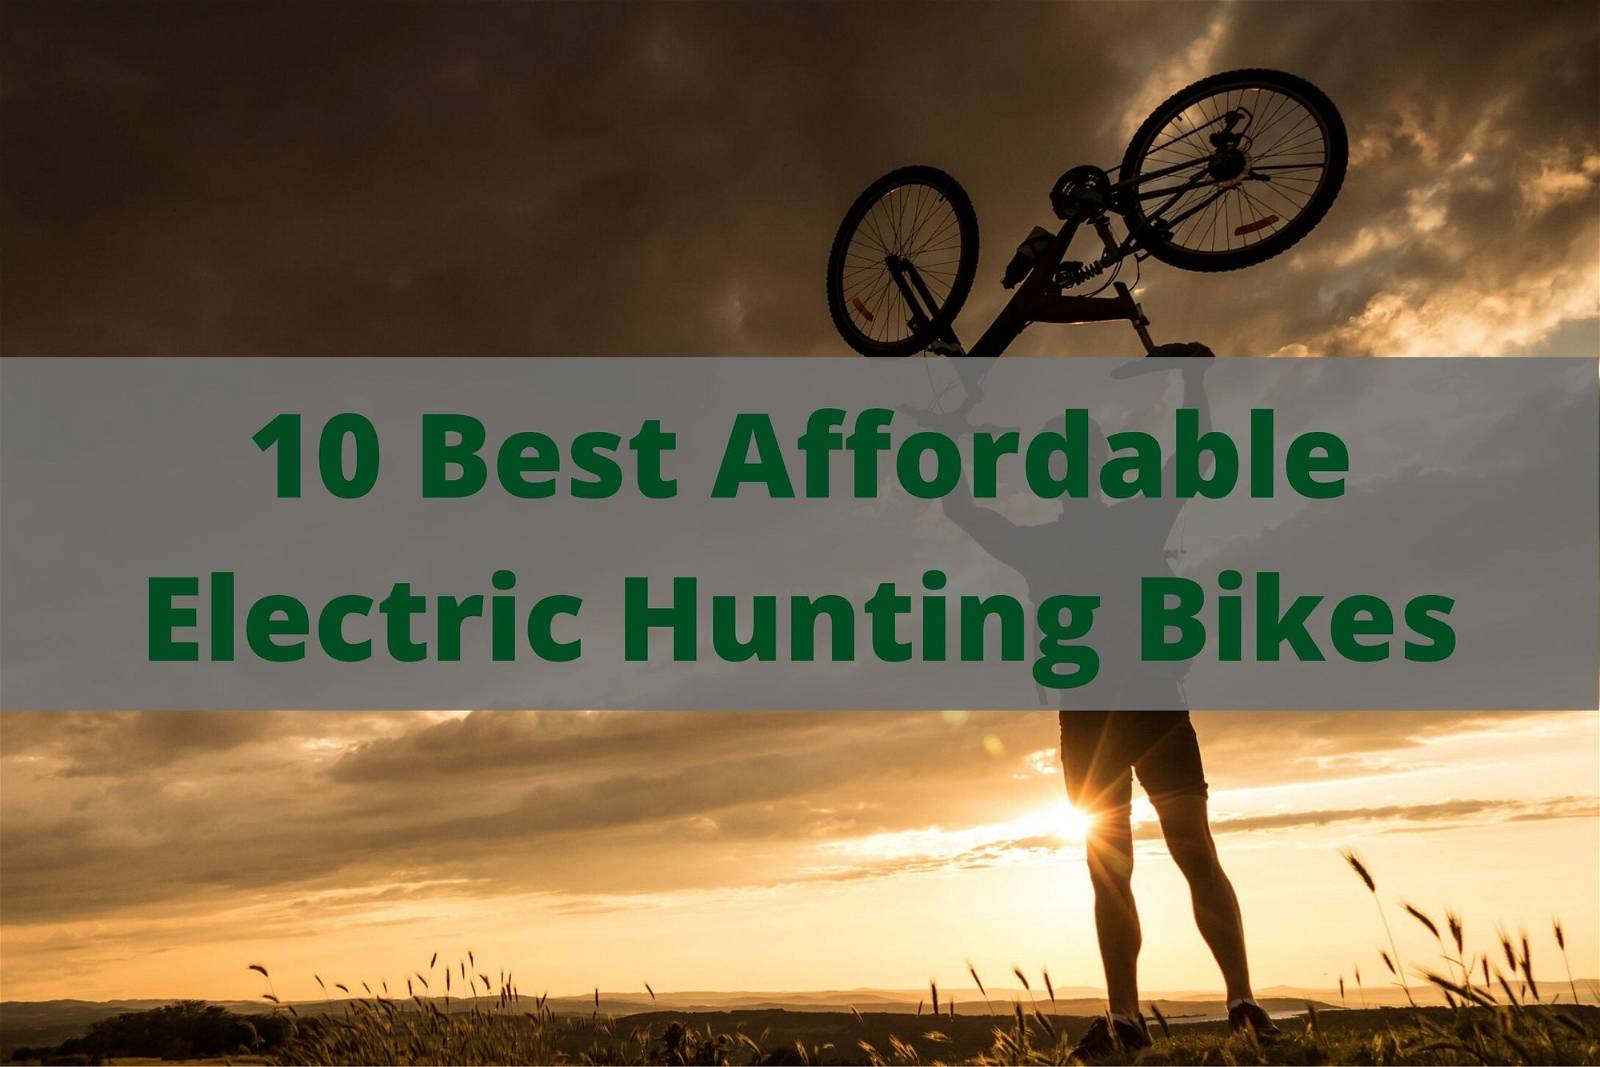 10 Best Affordable Electric Hunting Bikes